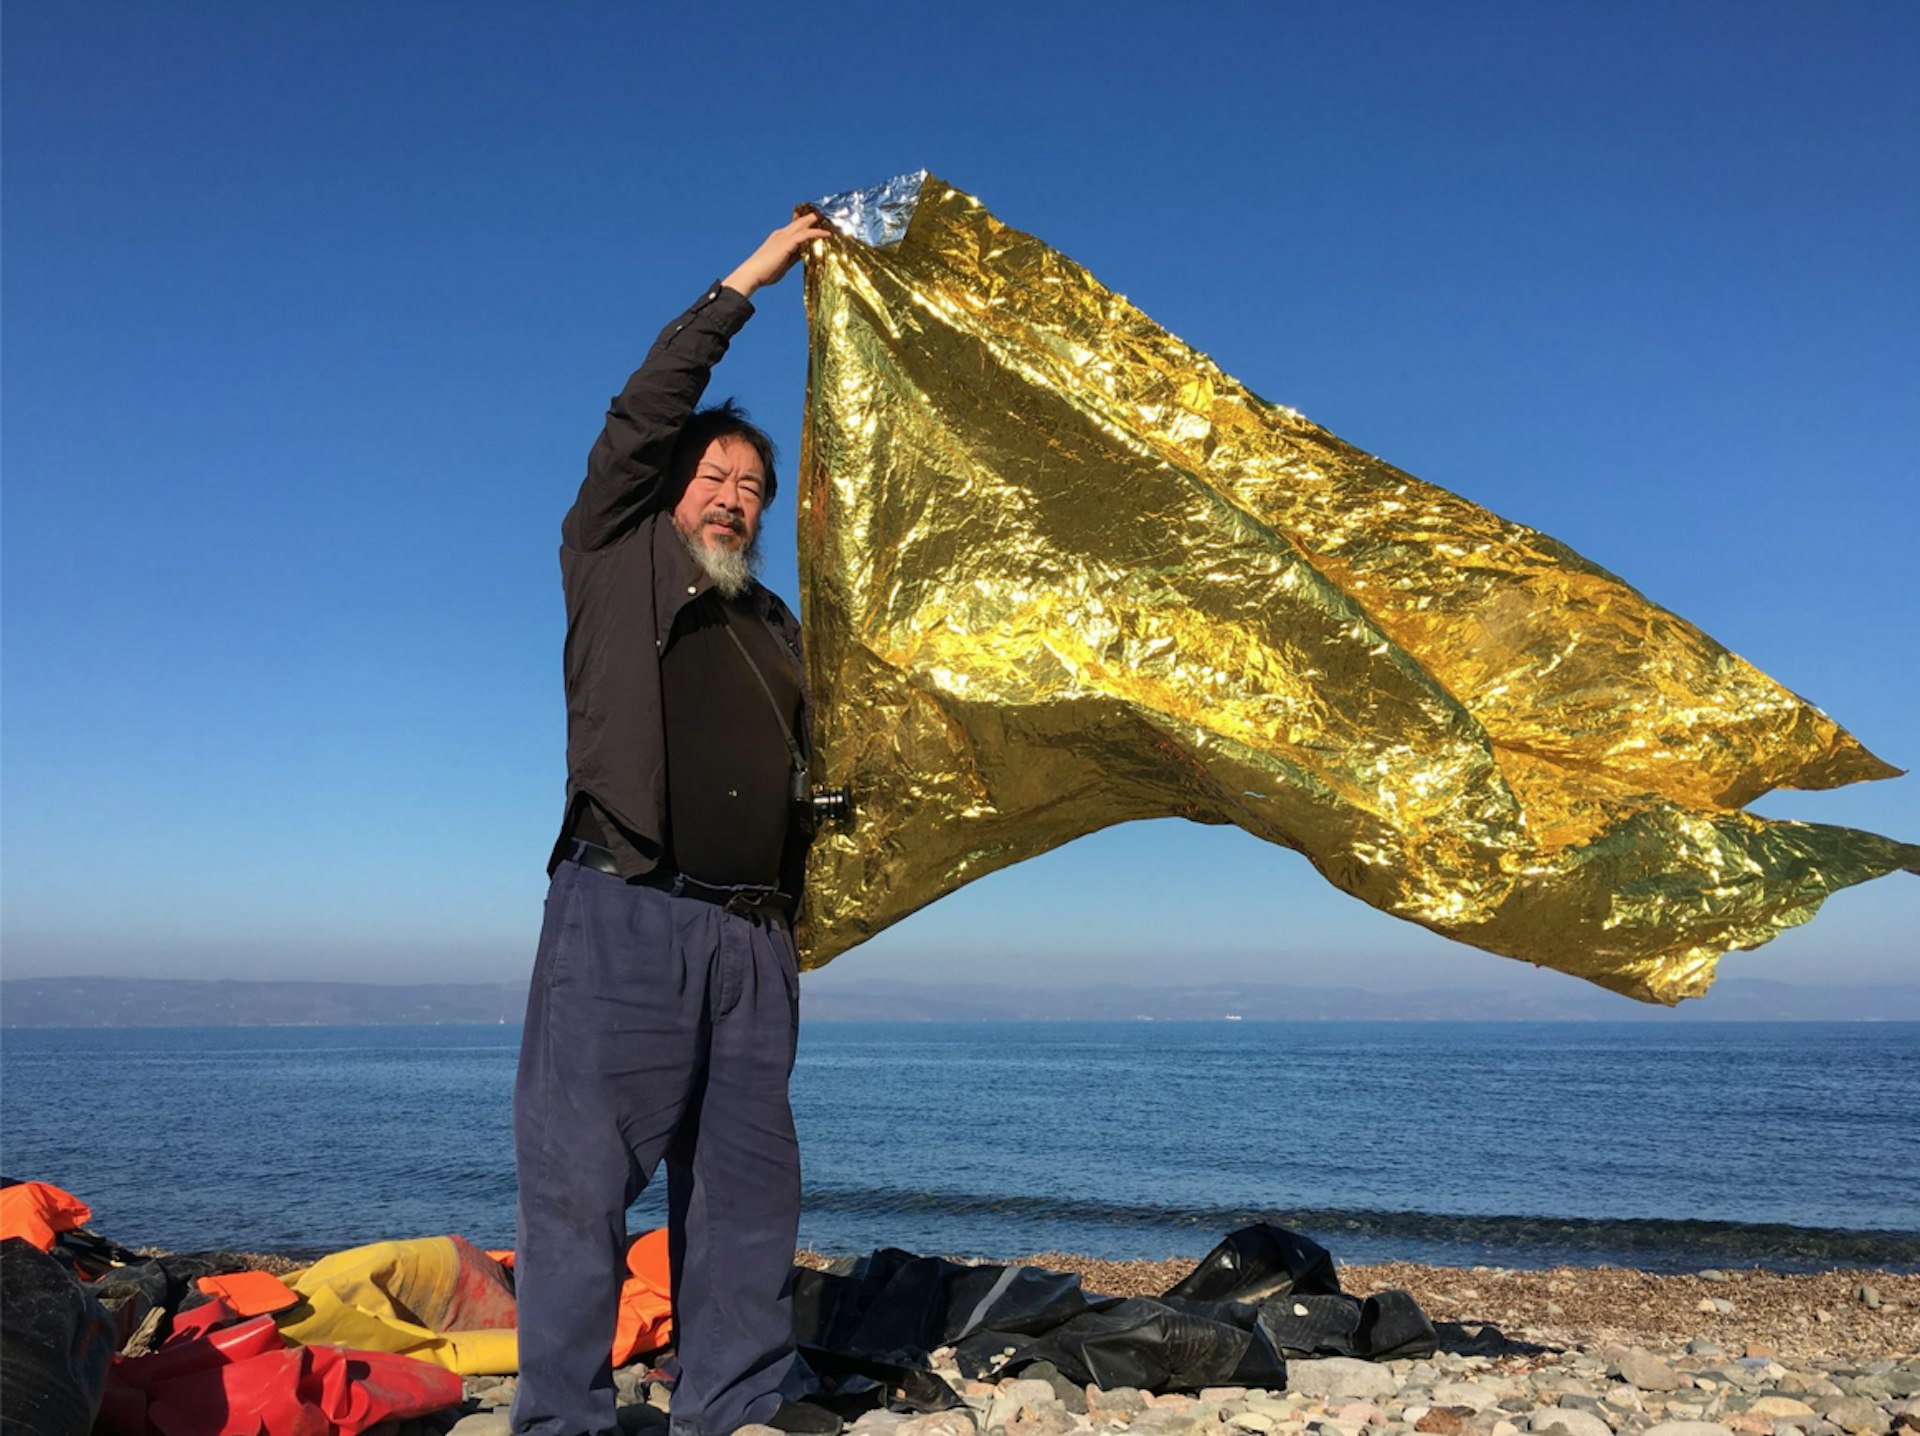 Ai Weiwei’s new project in Lesbos: Making art that responds to the refugee crisis